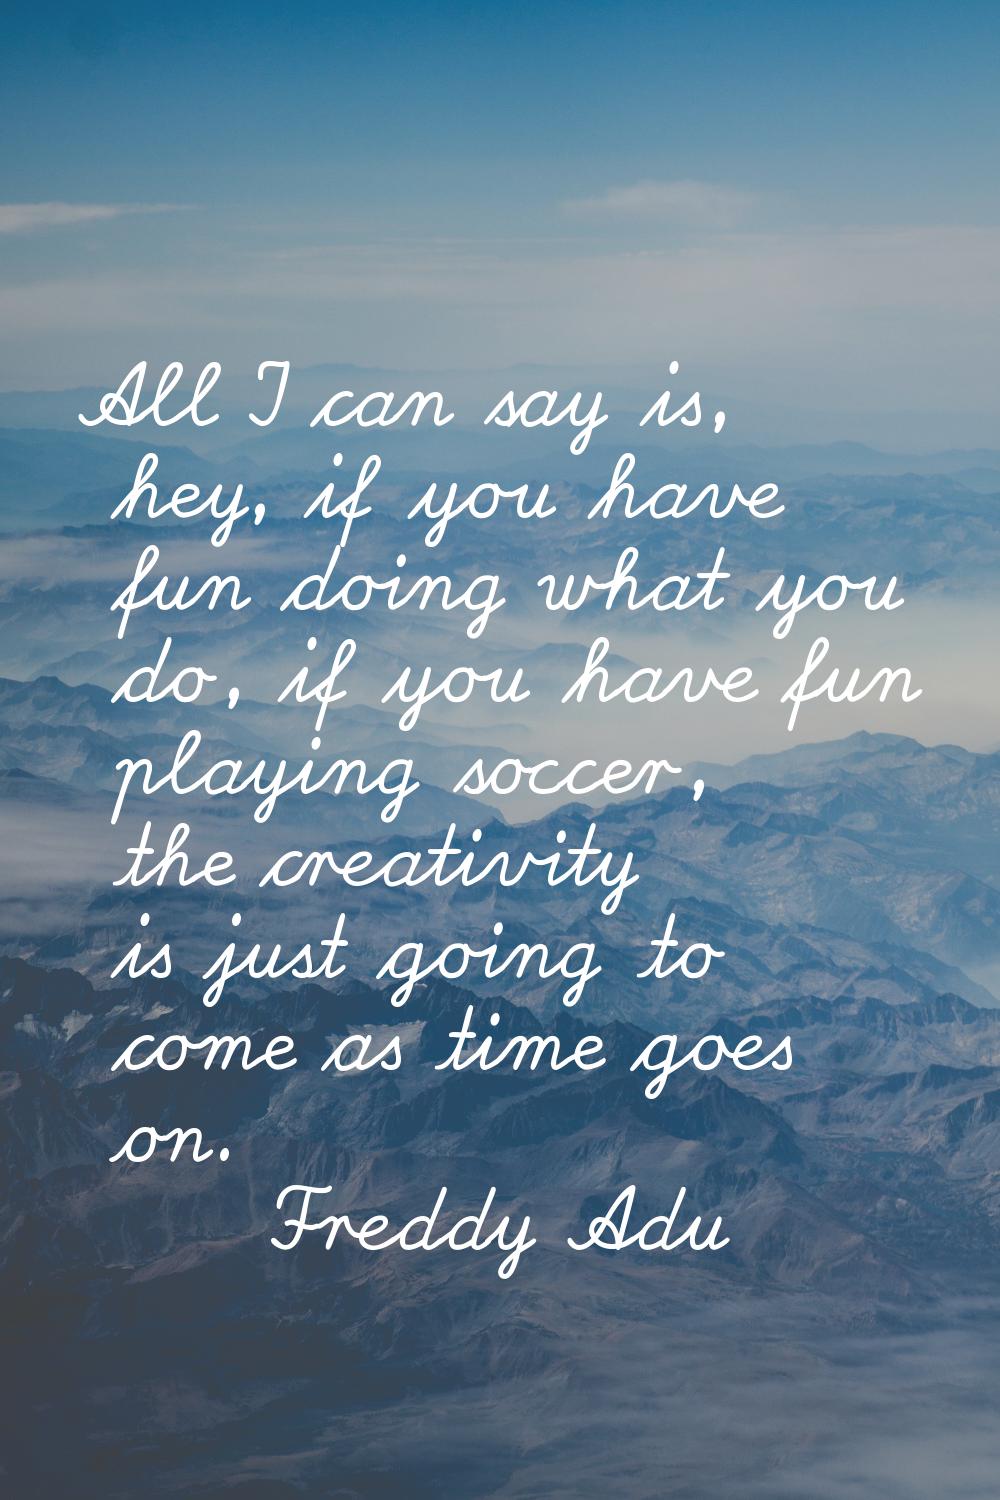 All I can say is, hey, if you have fun doing what you do, if you have fun playing soccer, the creat